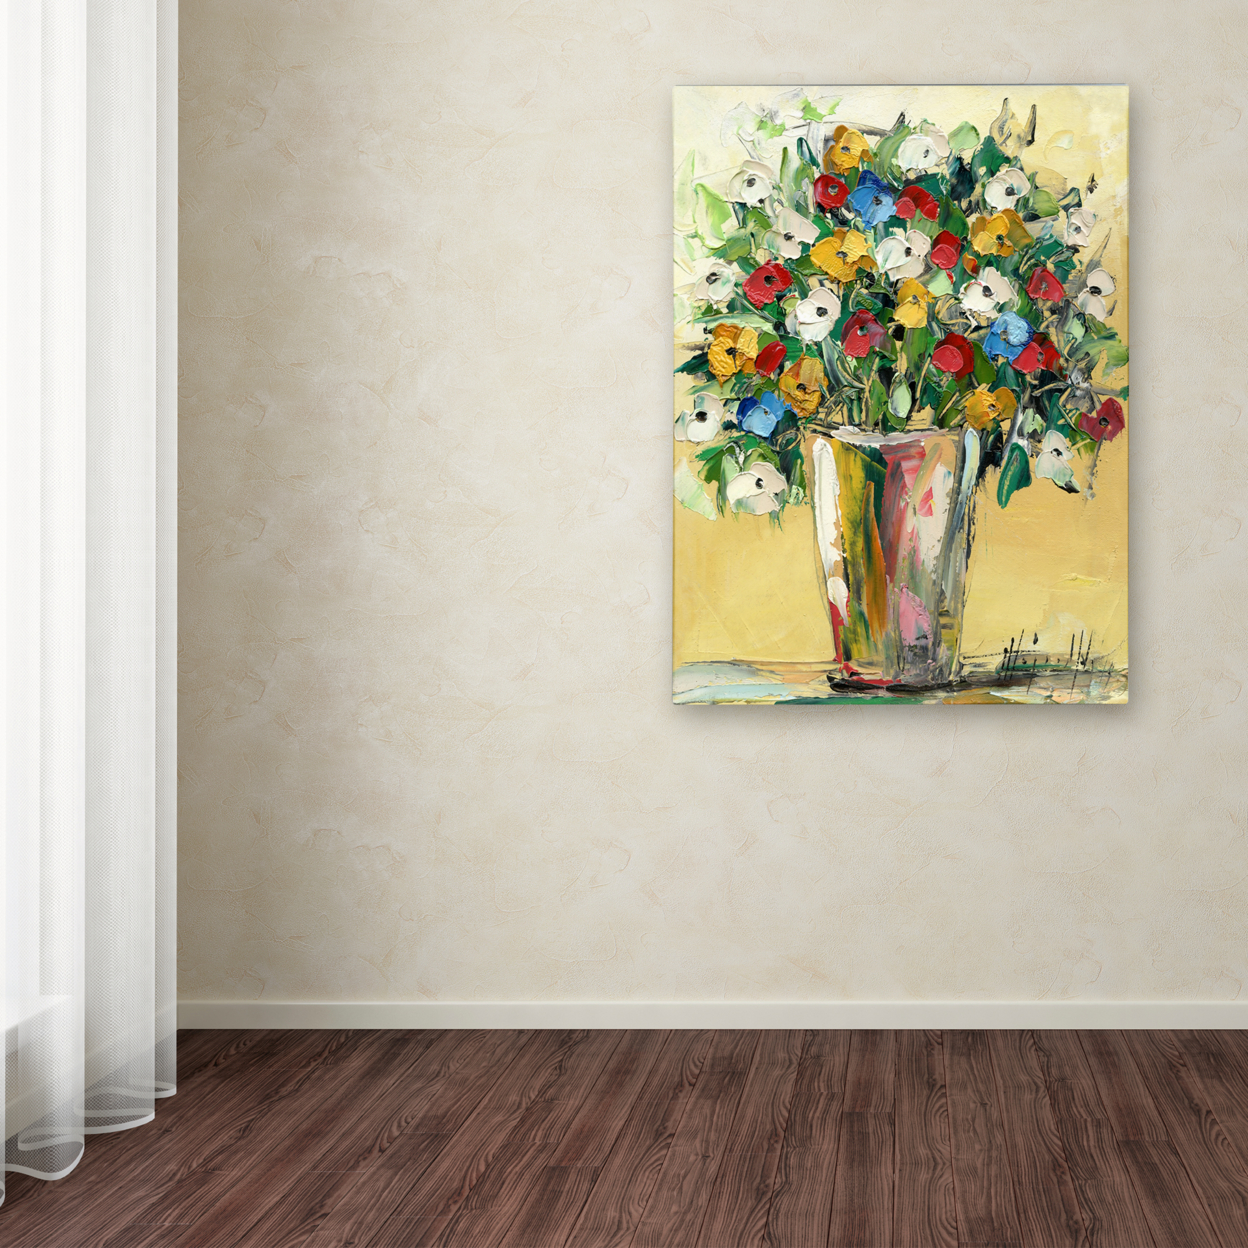 Hai Odelia 'Spring Flowers In A Vase 9' Canvas Wall Art 35 X 47 Inches